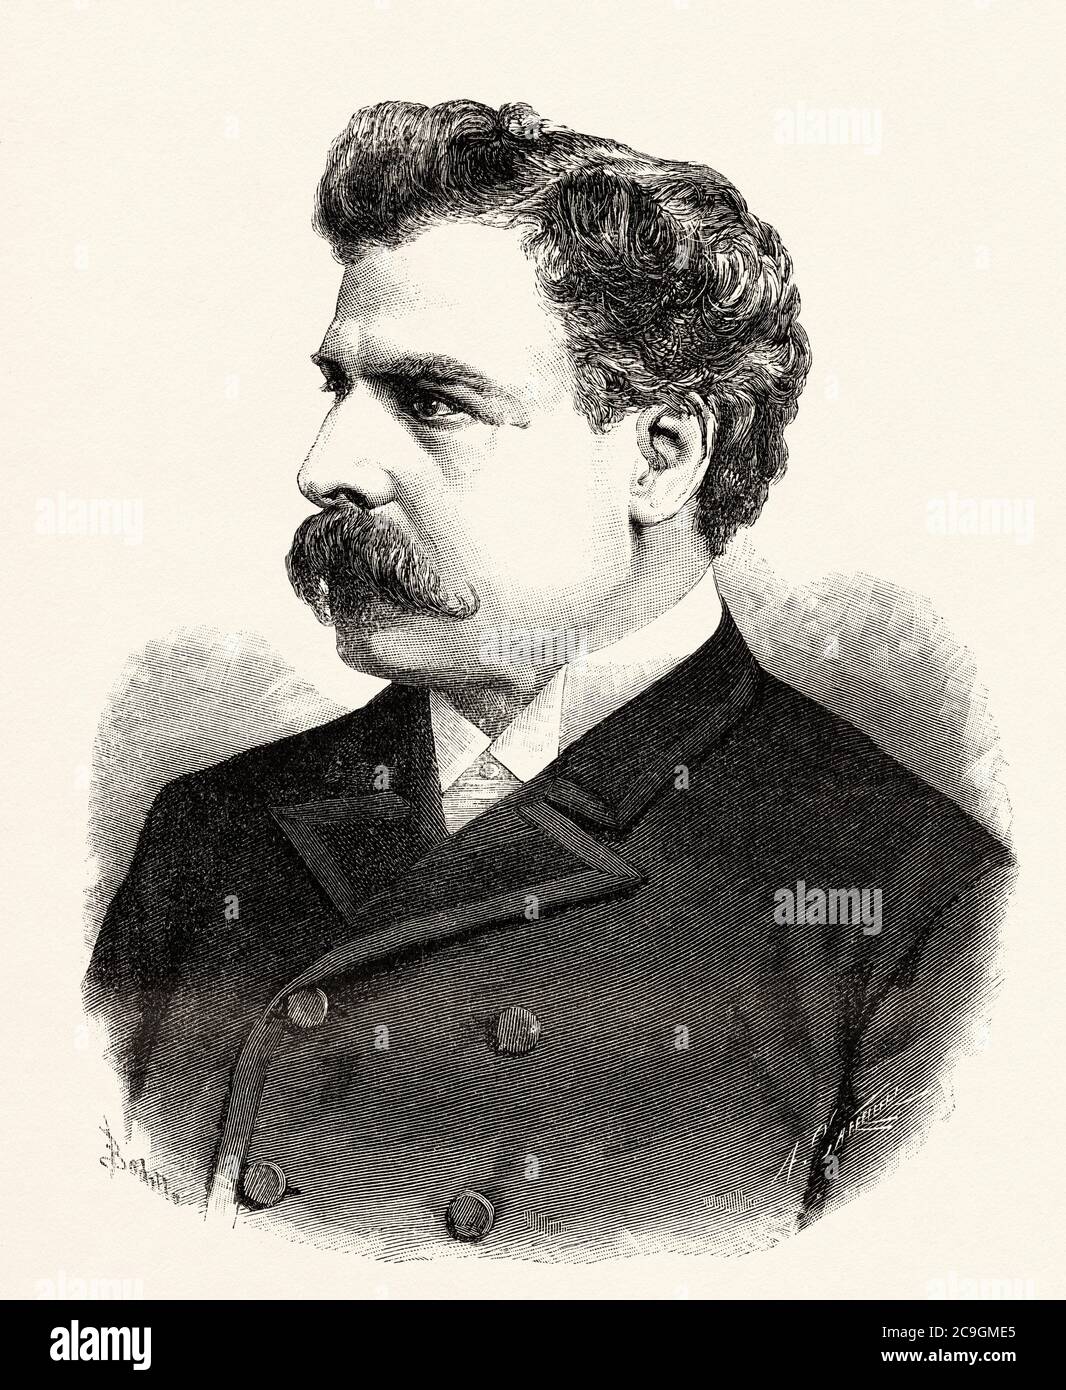 Portrait of Julio Herrera y Obes (Montevideo 1841 - 1912) Uruguayan politician, lawyer, journalist and constitutional president between the years 1890 and 1894, Uruguay. Old XIX century engraved illustration from La Ilustracion Española y Americana 1890 Stock Photo